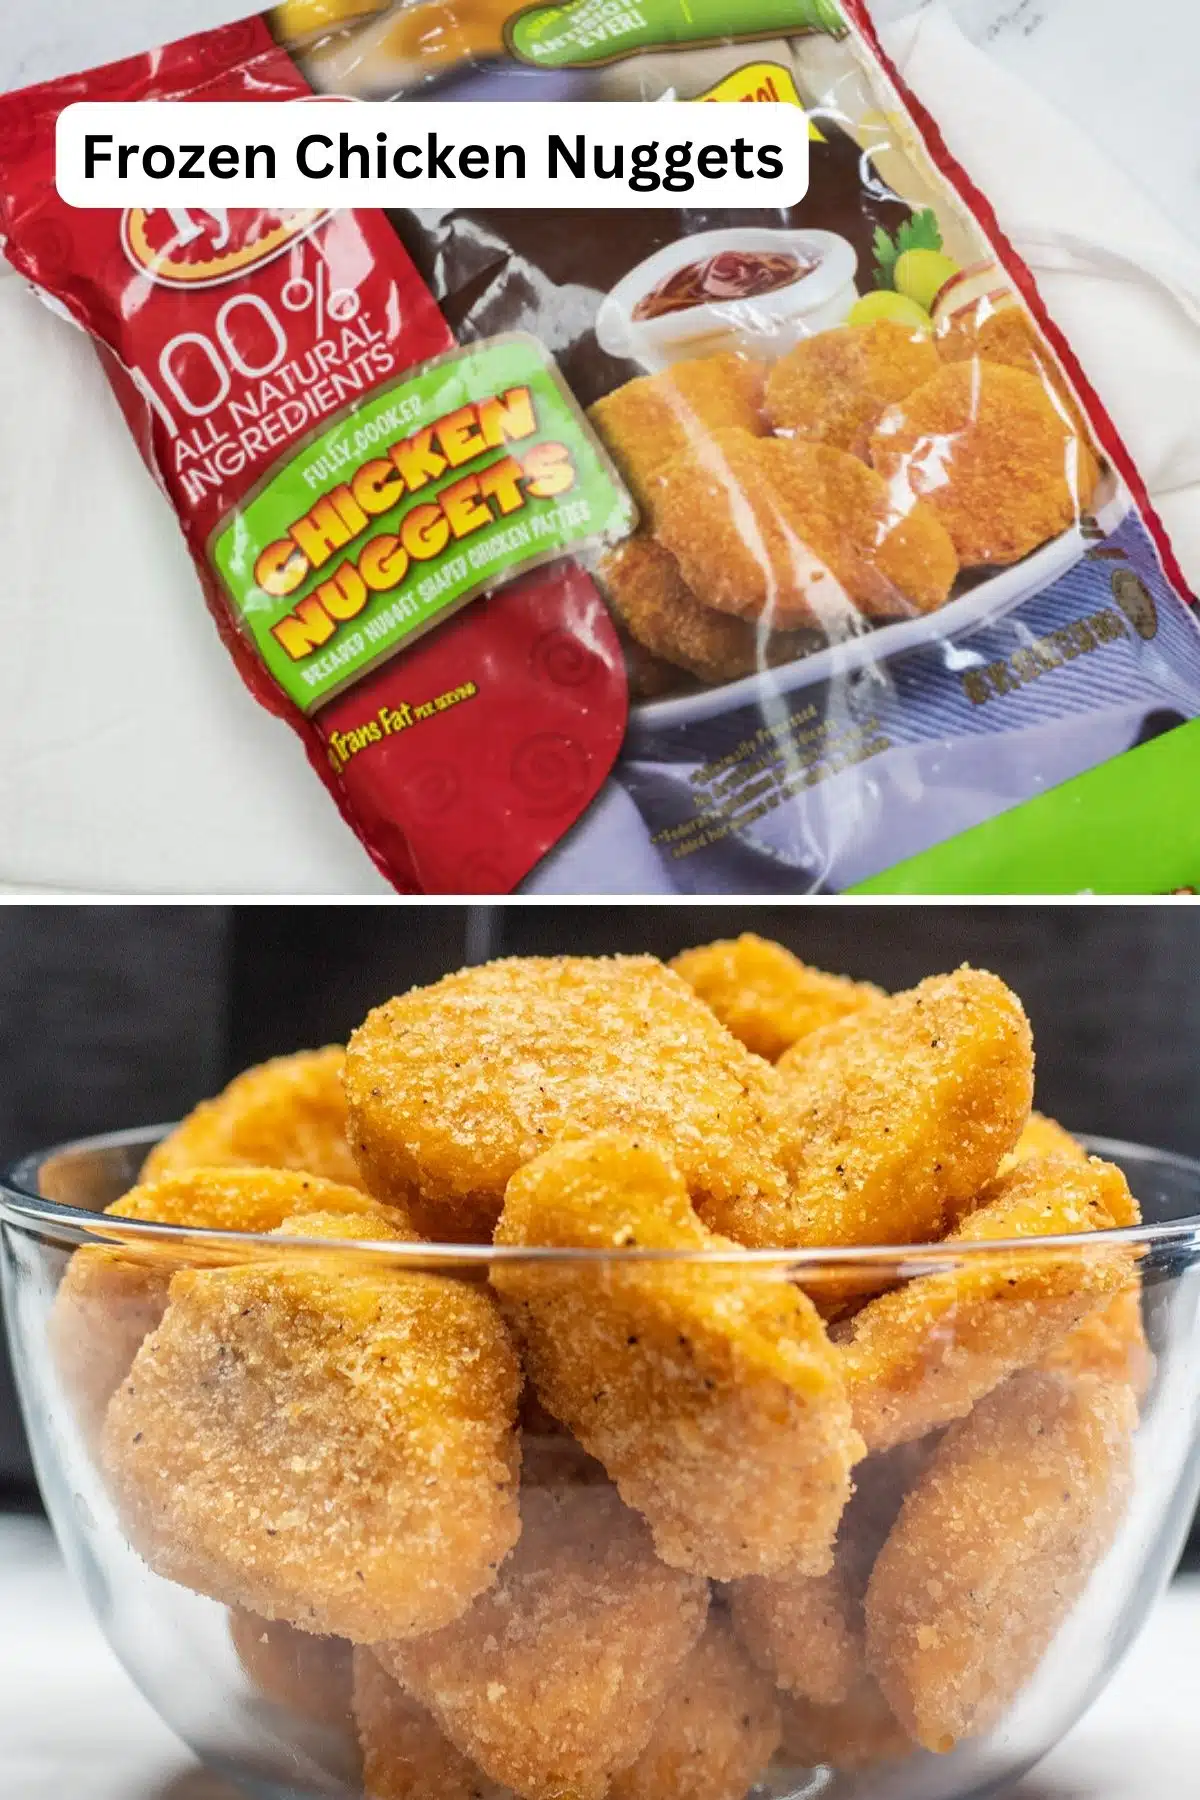 Tall image showing ingredients for these air fryer chicken nuggets from frozen.